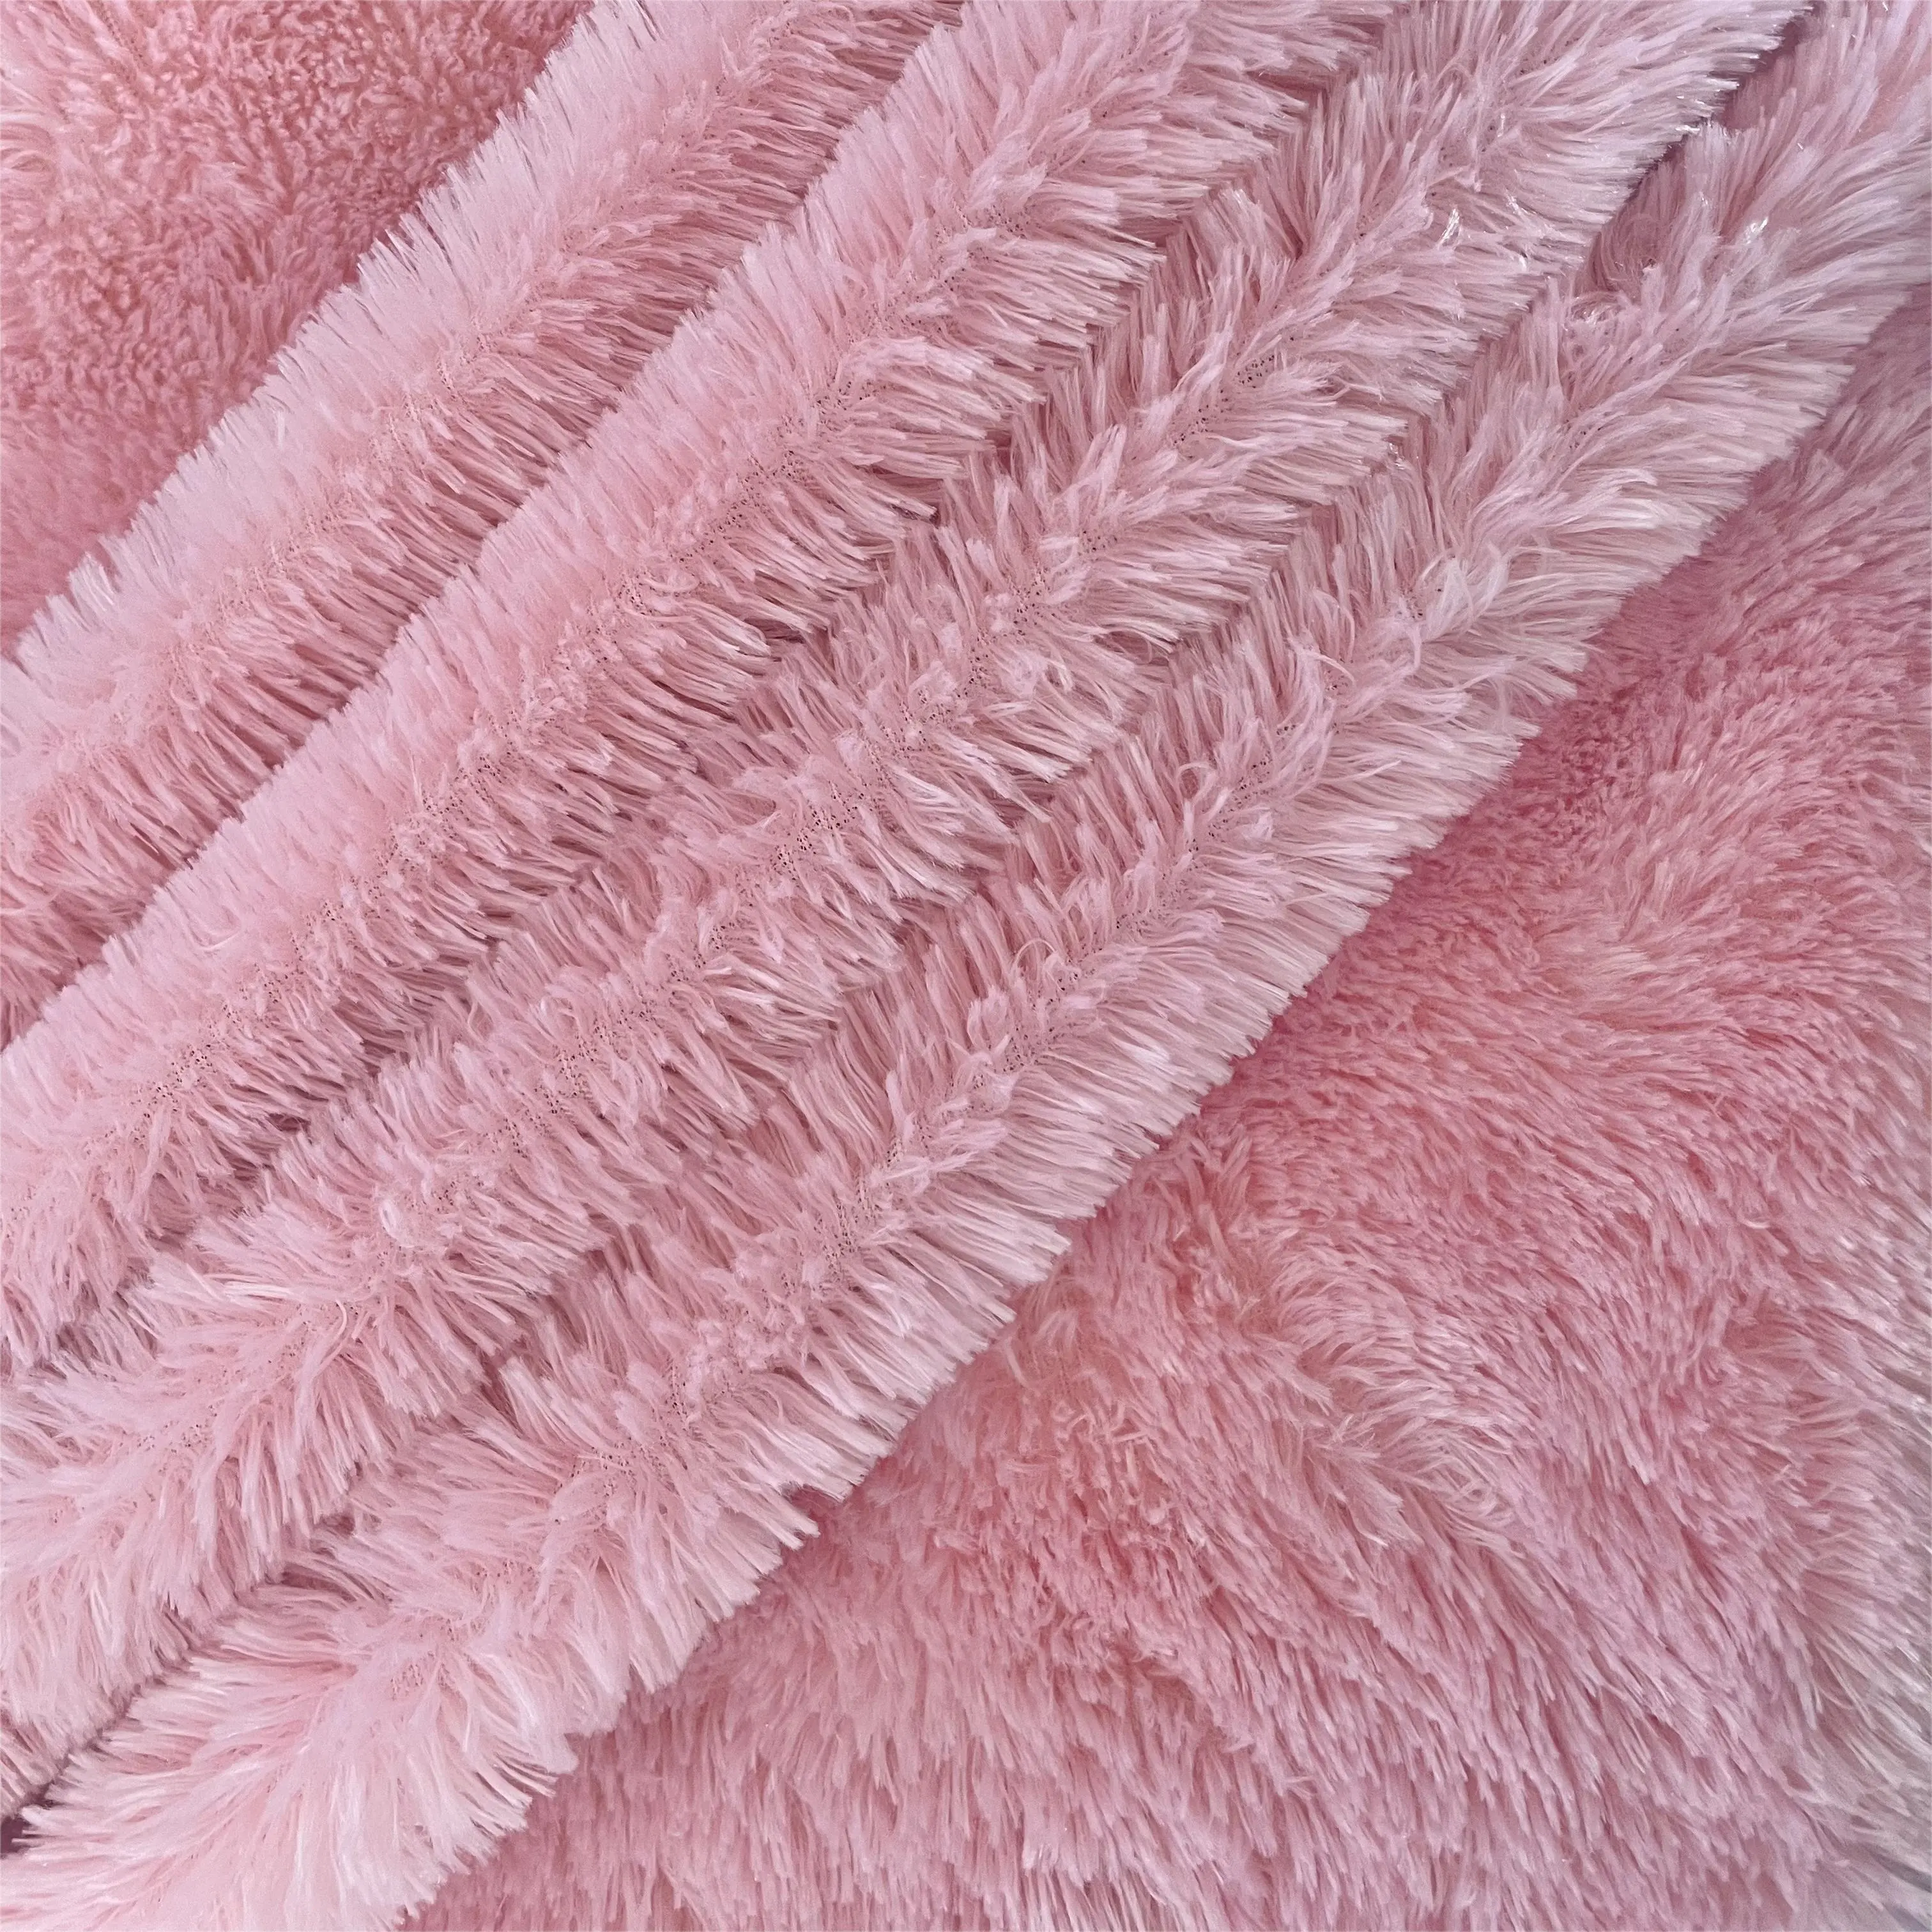 Hot 100% polyester soft fine plush faux rabbit fur fabric for clothing collar toys